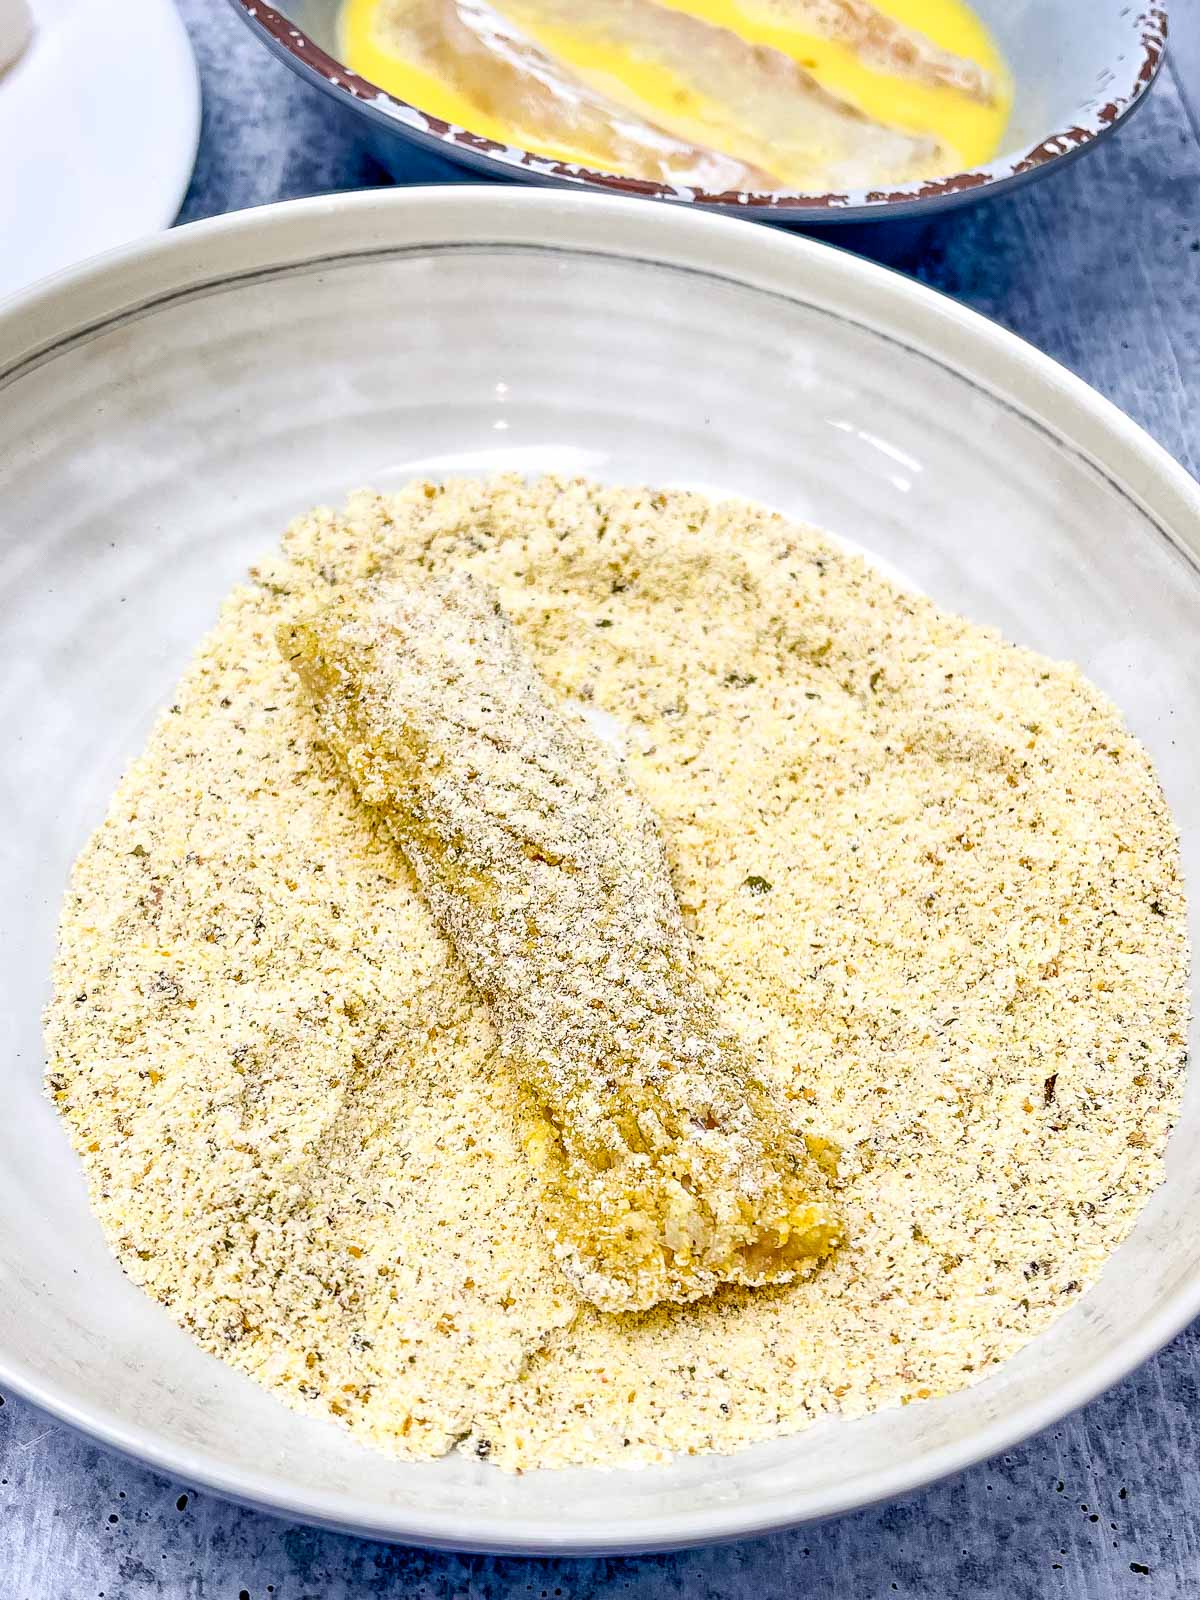 Cornmeal breading in a bowl with a fish stick inside the bowl coated with the corn flour.